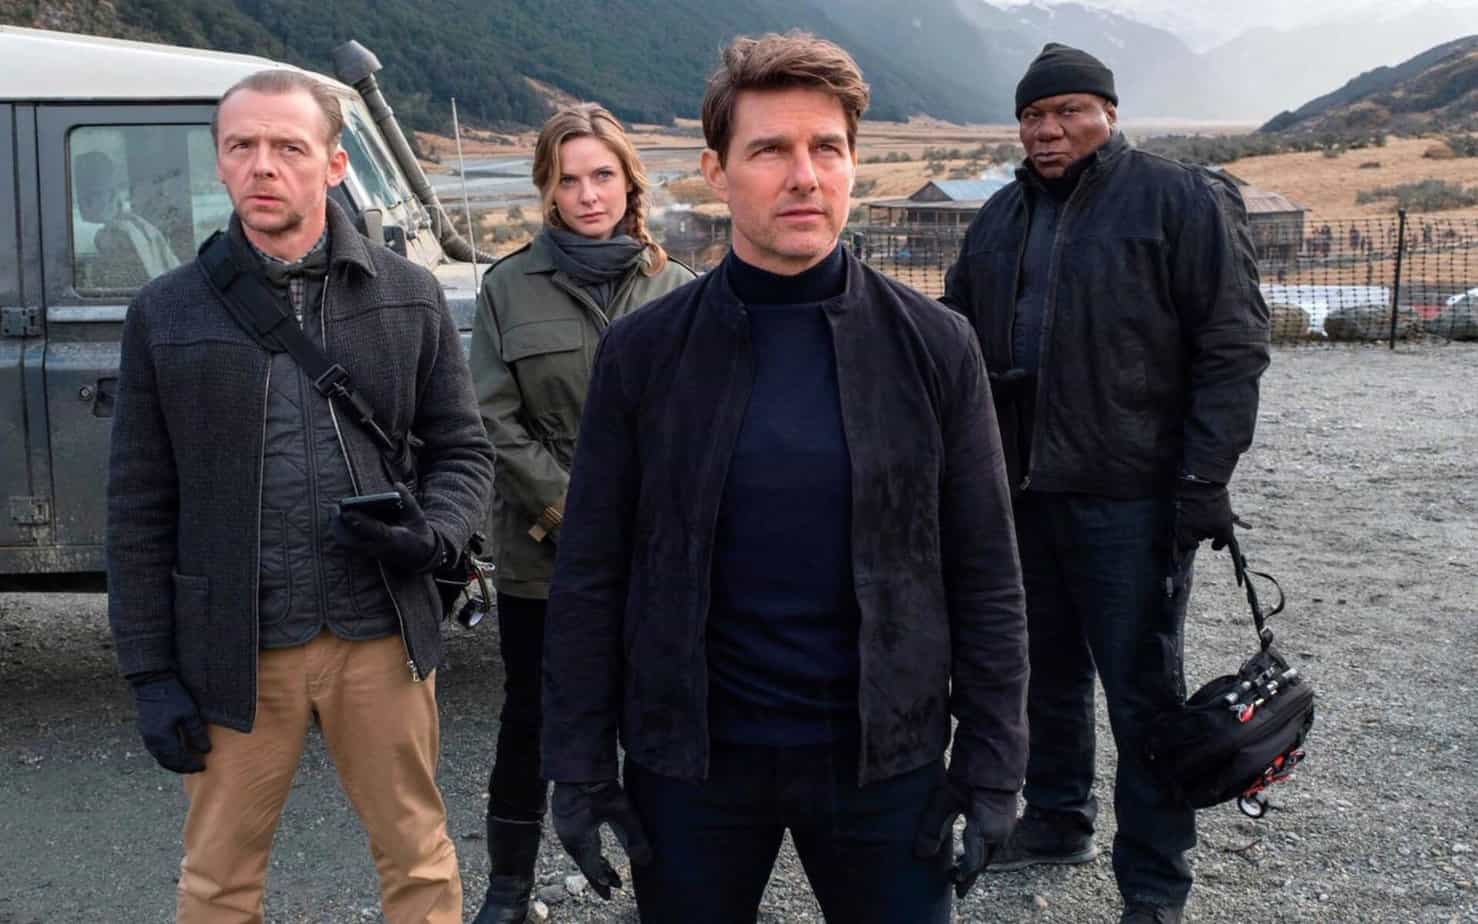 MISSION IMPOSSIBLE STILL DELAYED - Simon Pegg speaks out on the issue